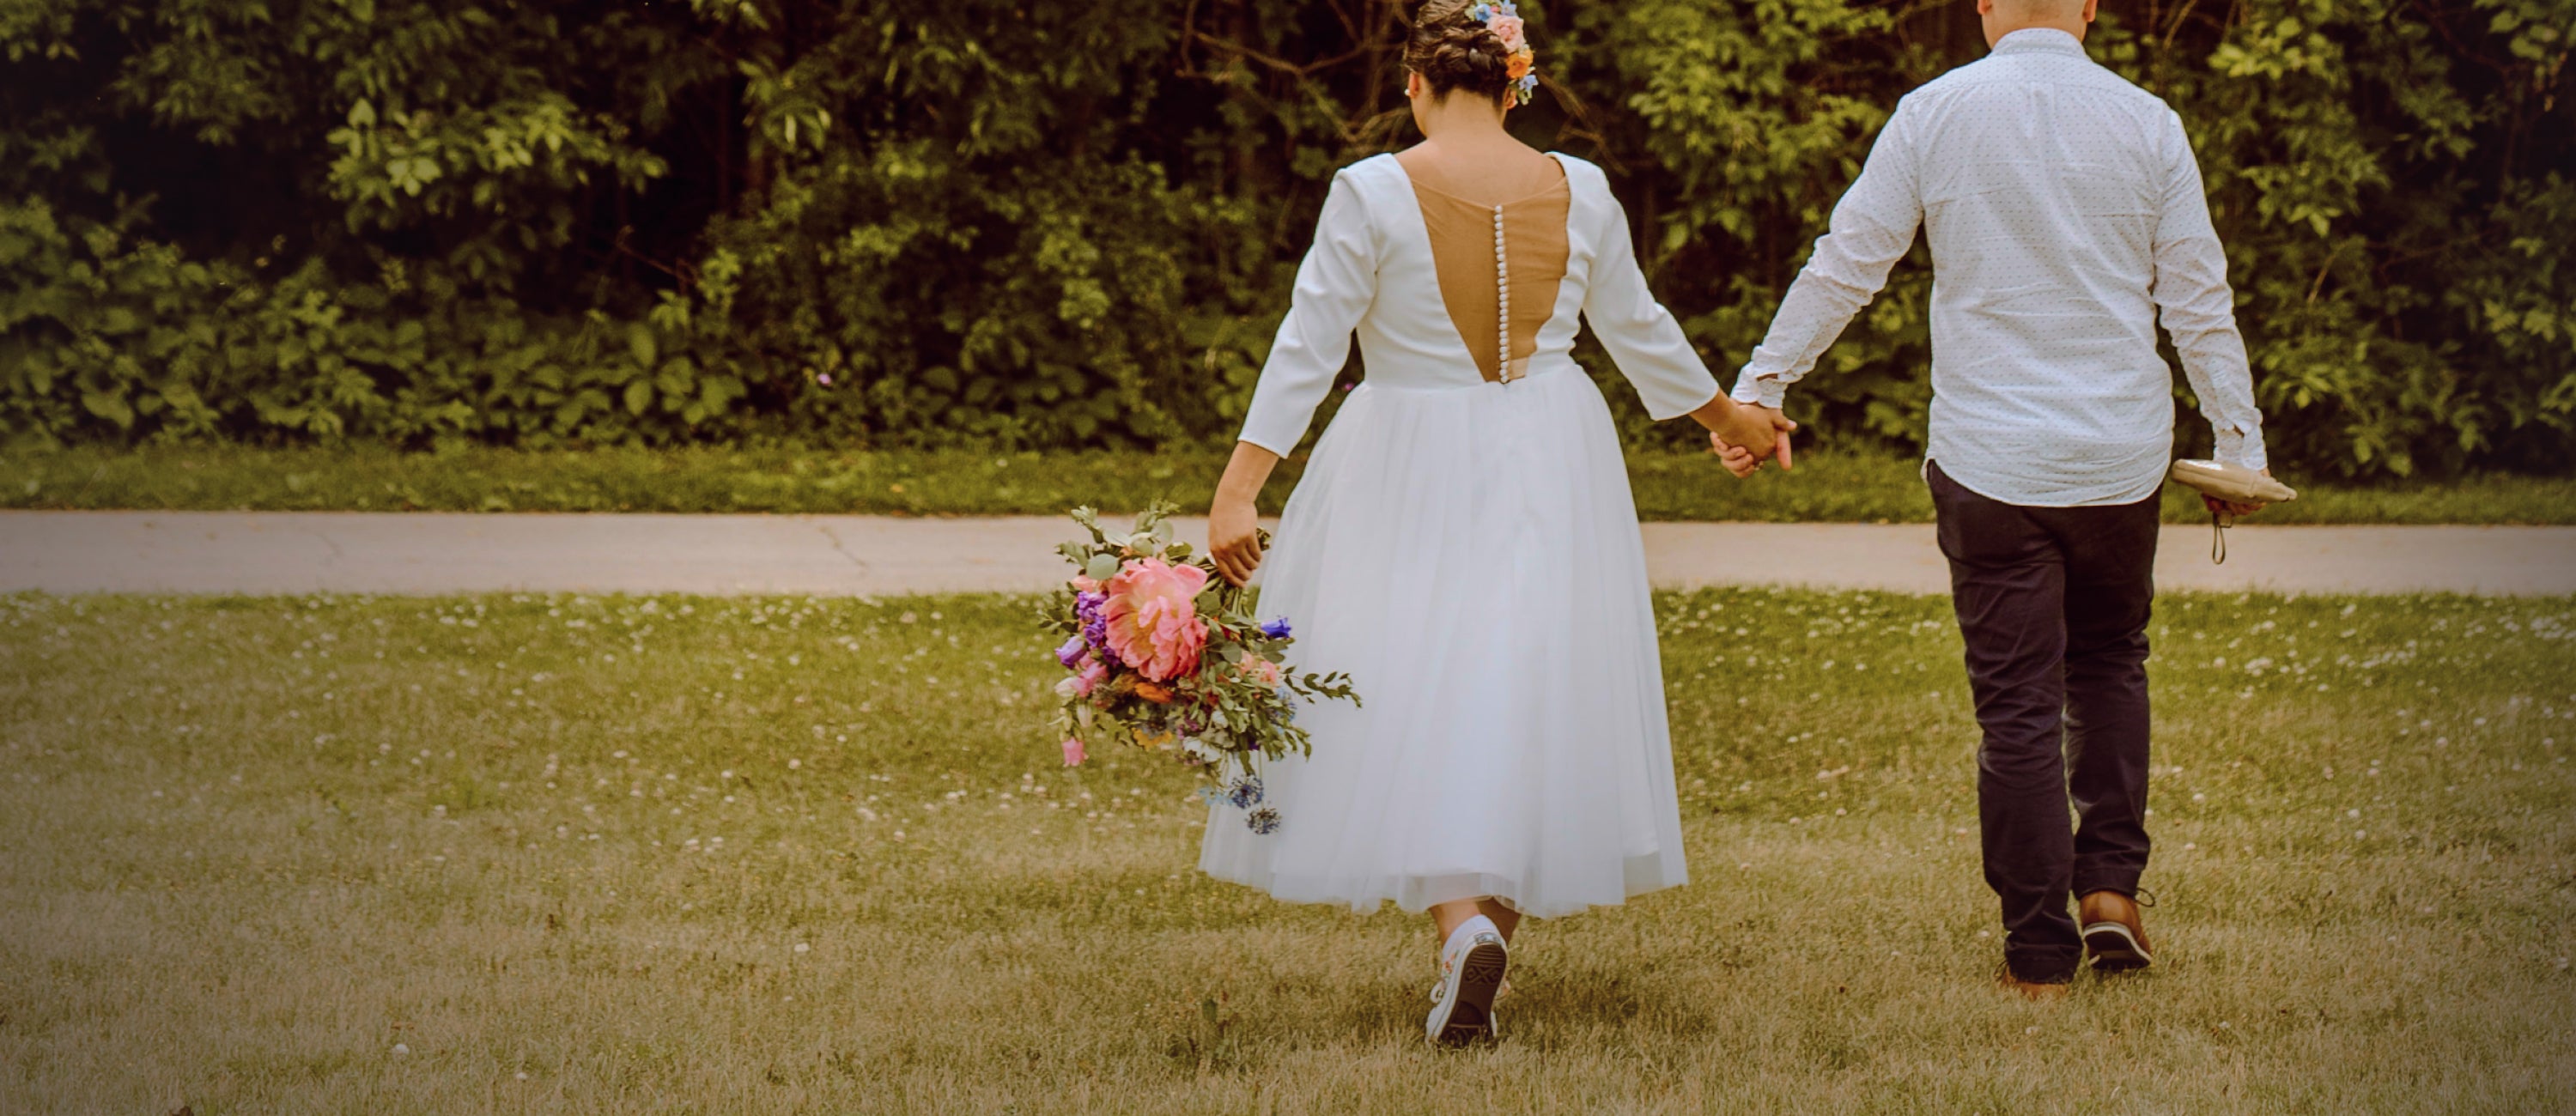 A bride and groom walking in the grass with their backs towards the candle. The bride is holding a colorful bouquet of flowers and wearing chucks.